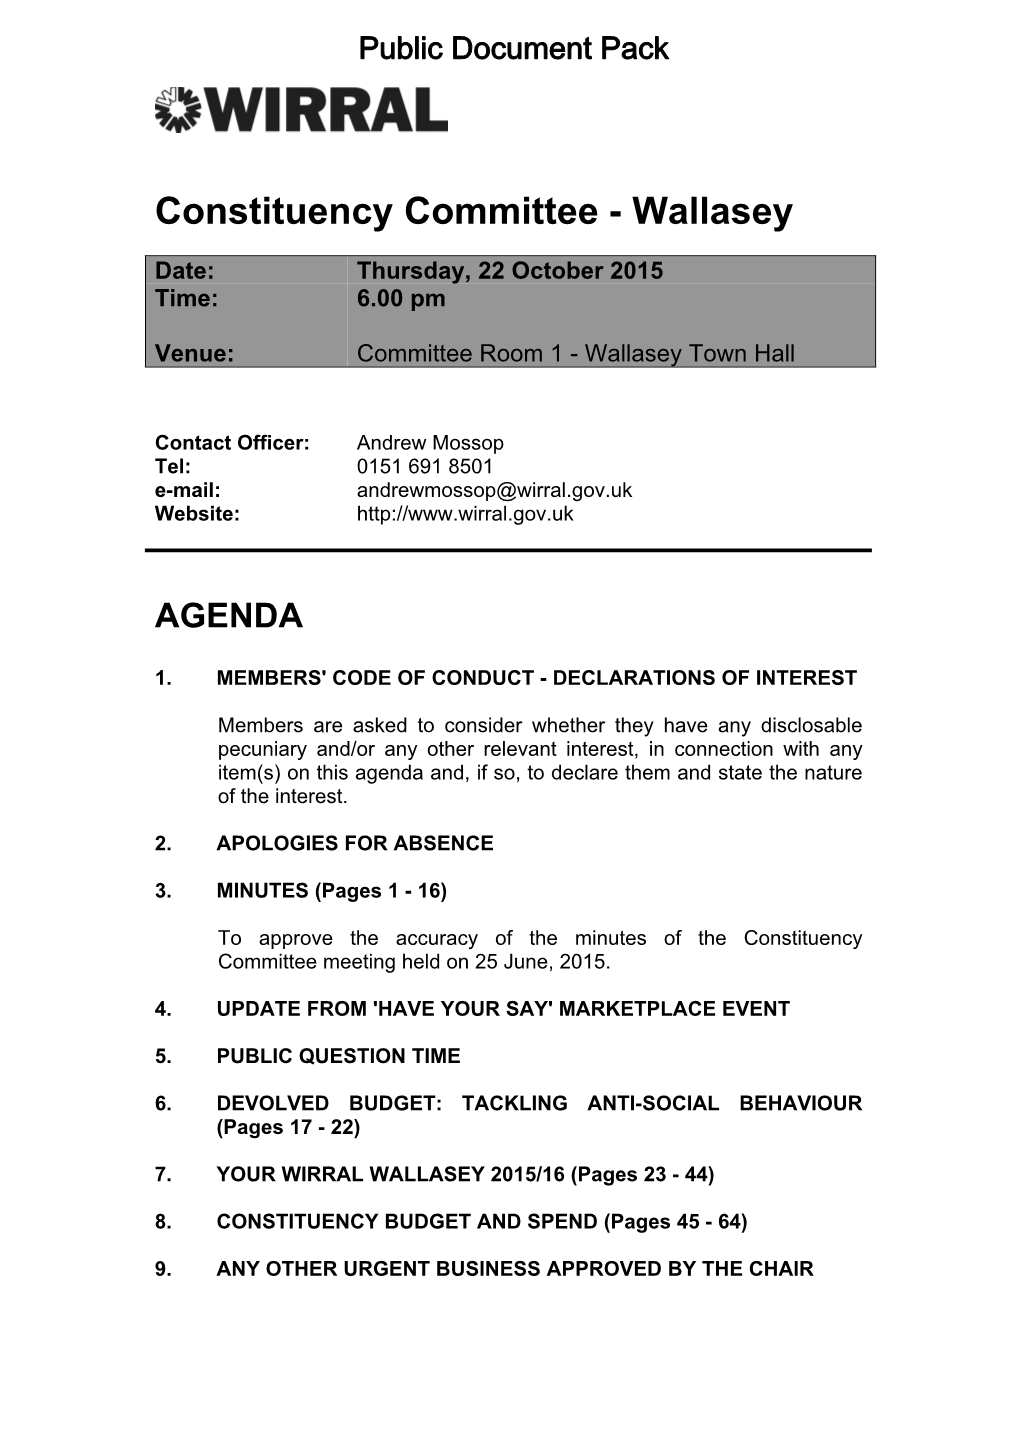 (Public Pack)Agenda Document for Constituency Committee